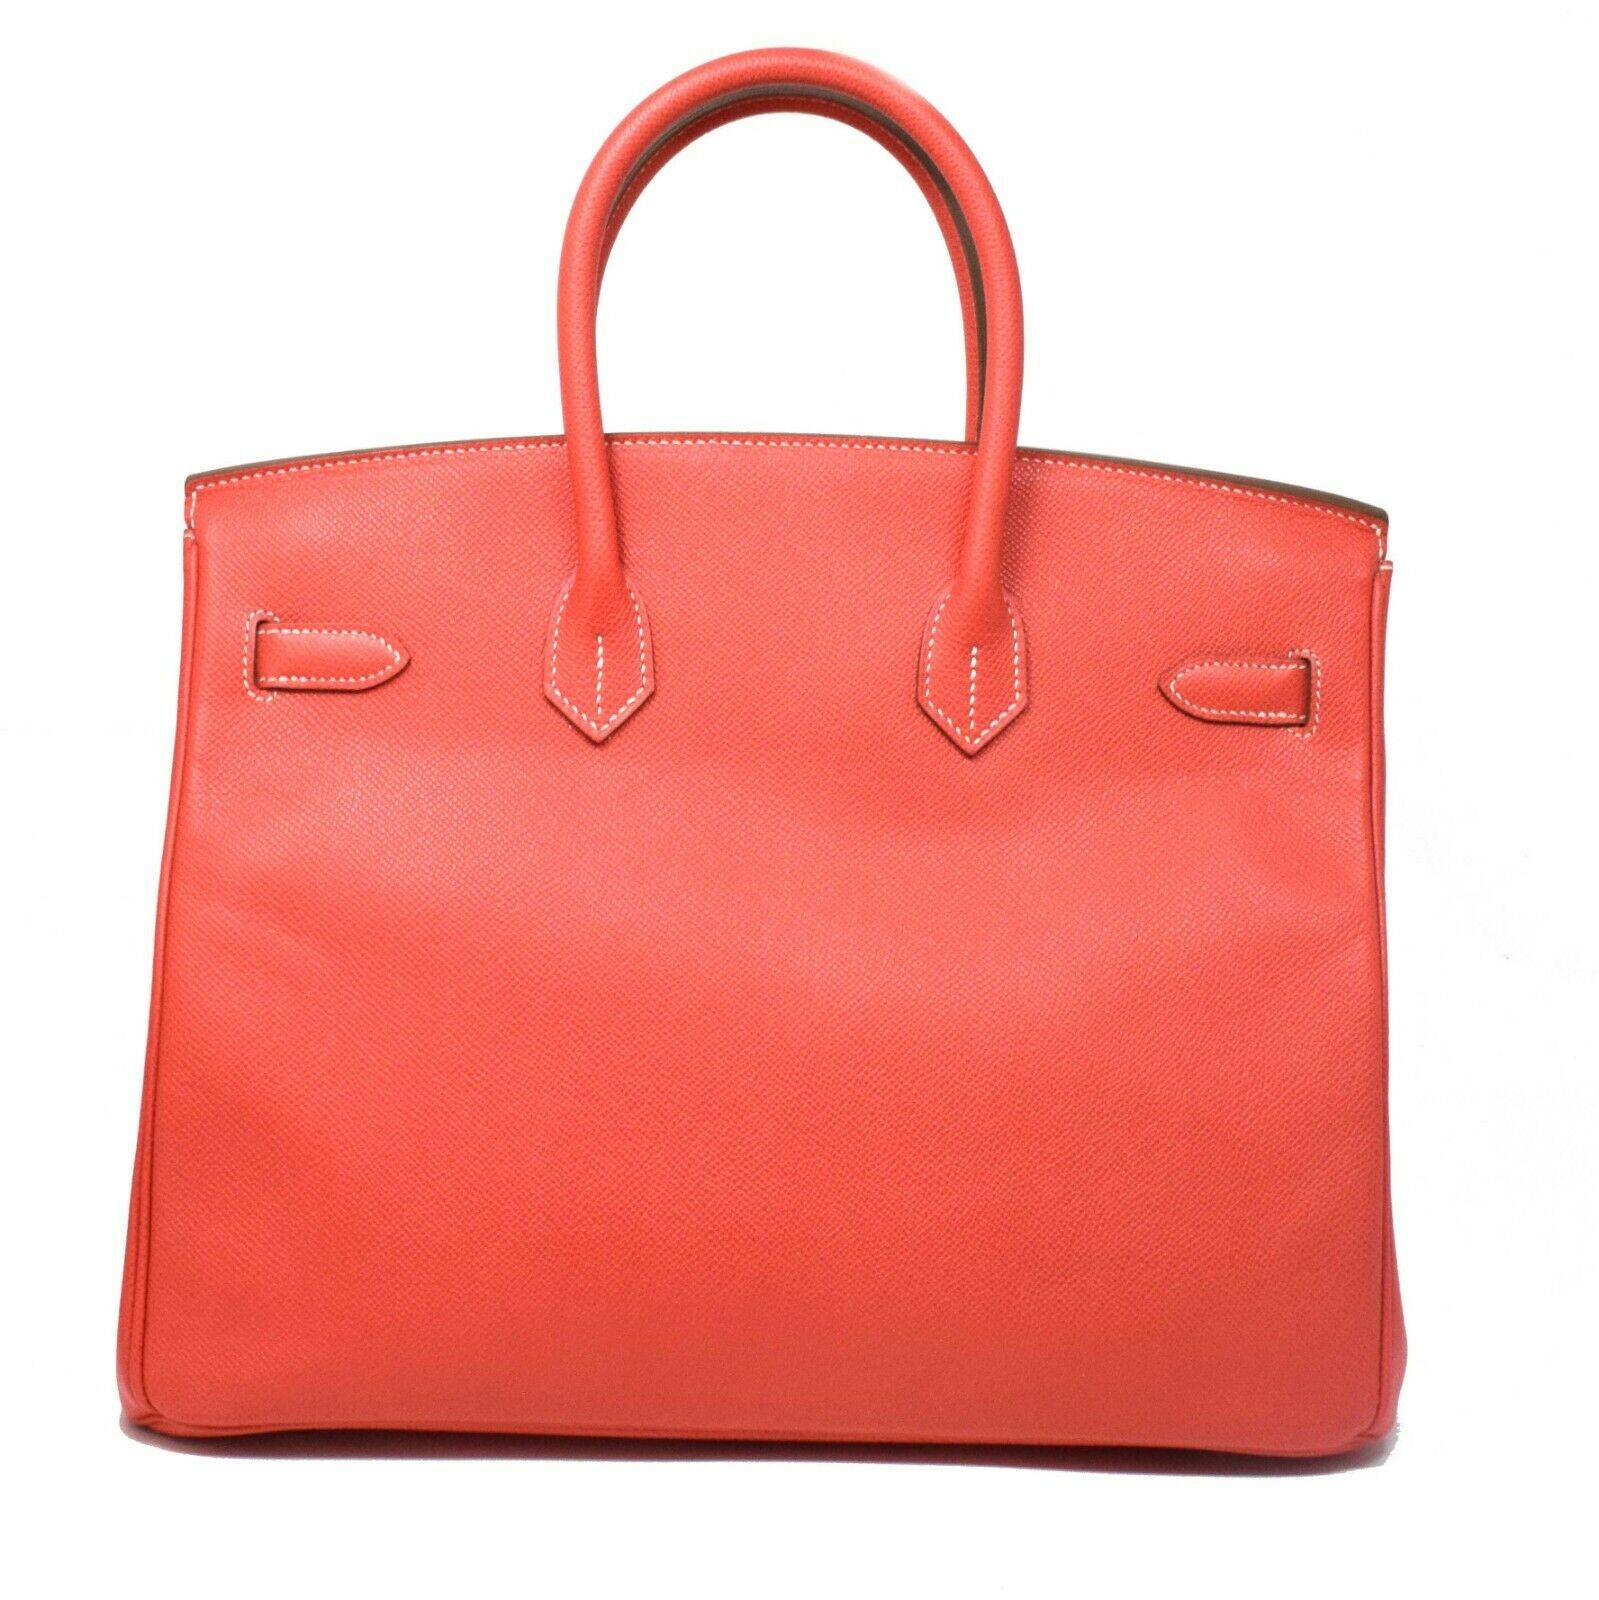 Brilliance Jewels, Miami
Questions? Call Us Anytime!
786,482,8100

Hermès Birkin 35 with gold-plated hardware, dual rolled top handles, protective feet at base, tonal Chevre lining, dual interior pockets; one with zip closure and belted turn-lock